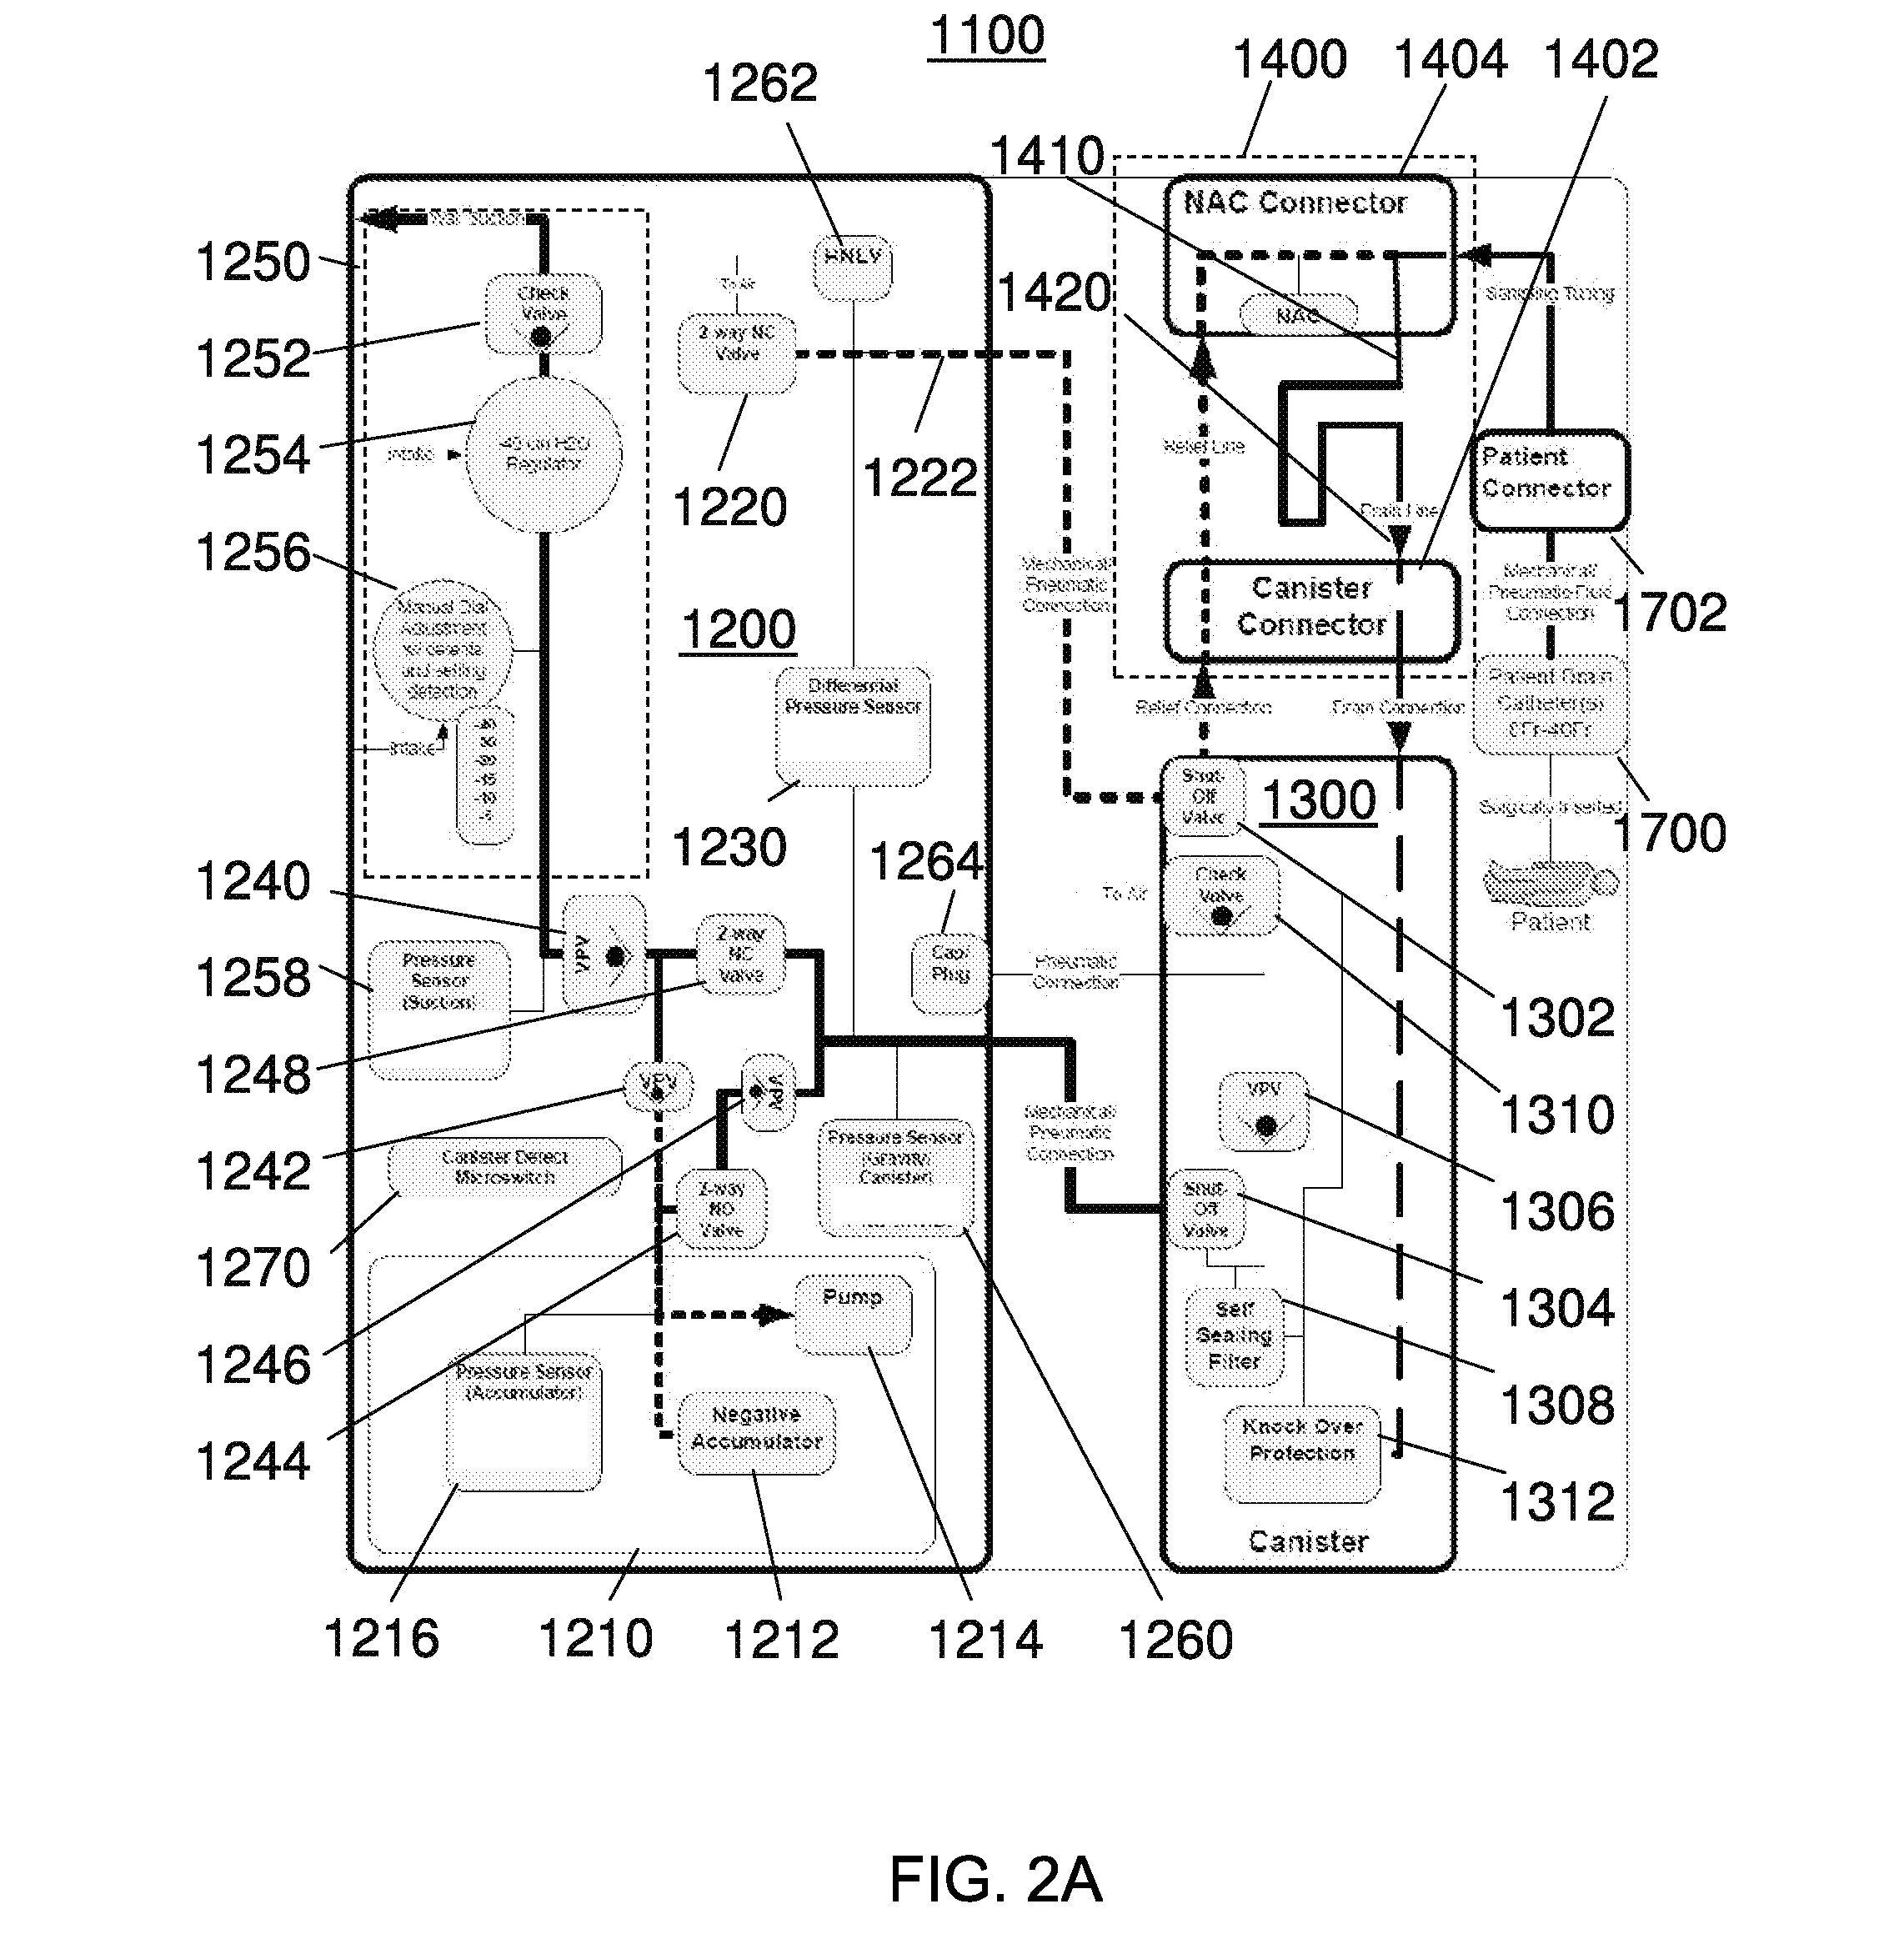 Chest drainage systems and methods